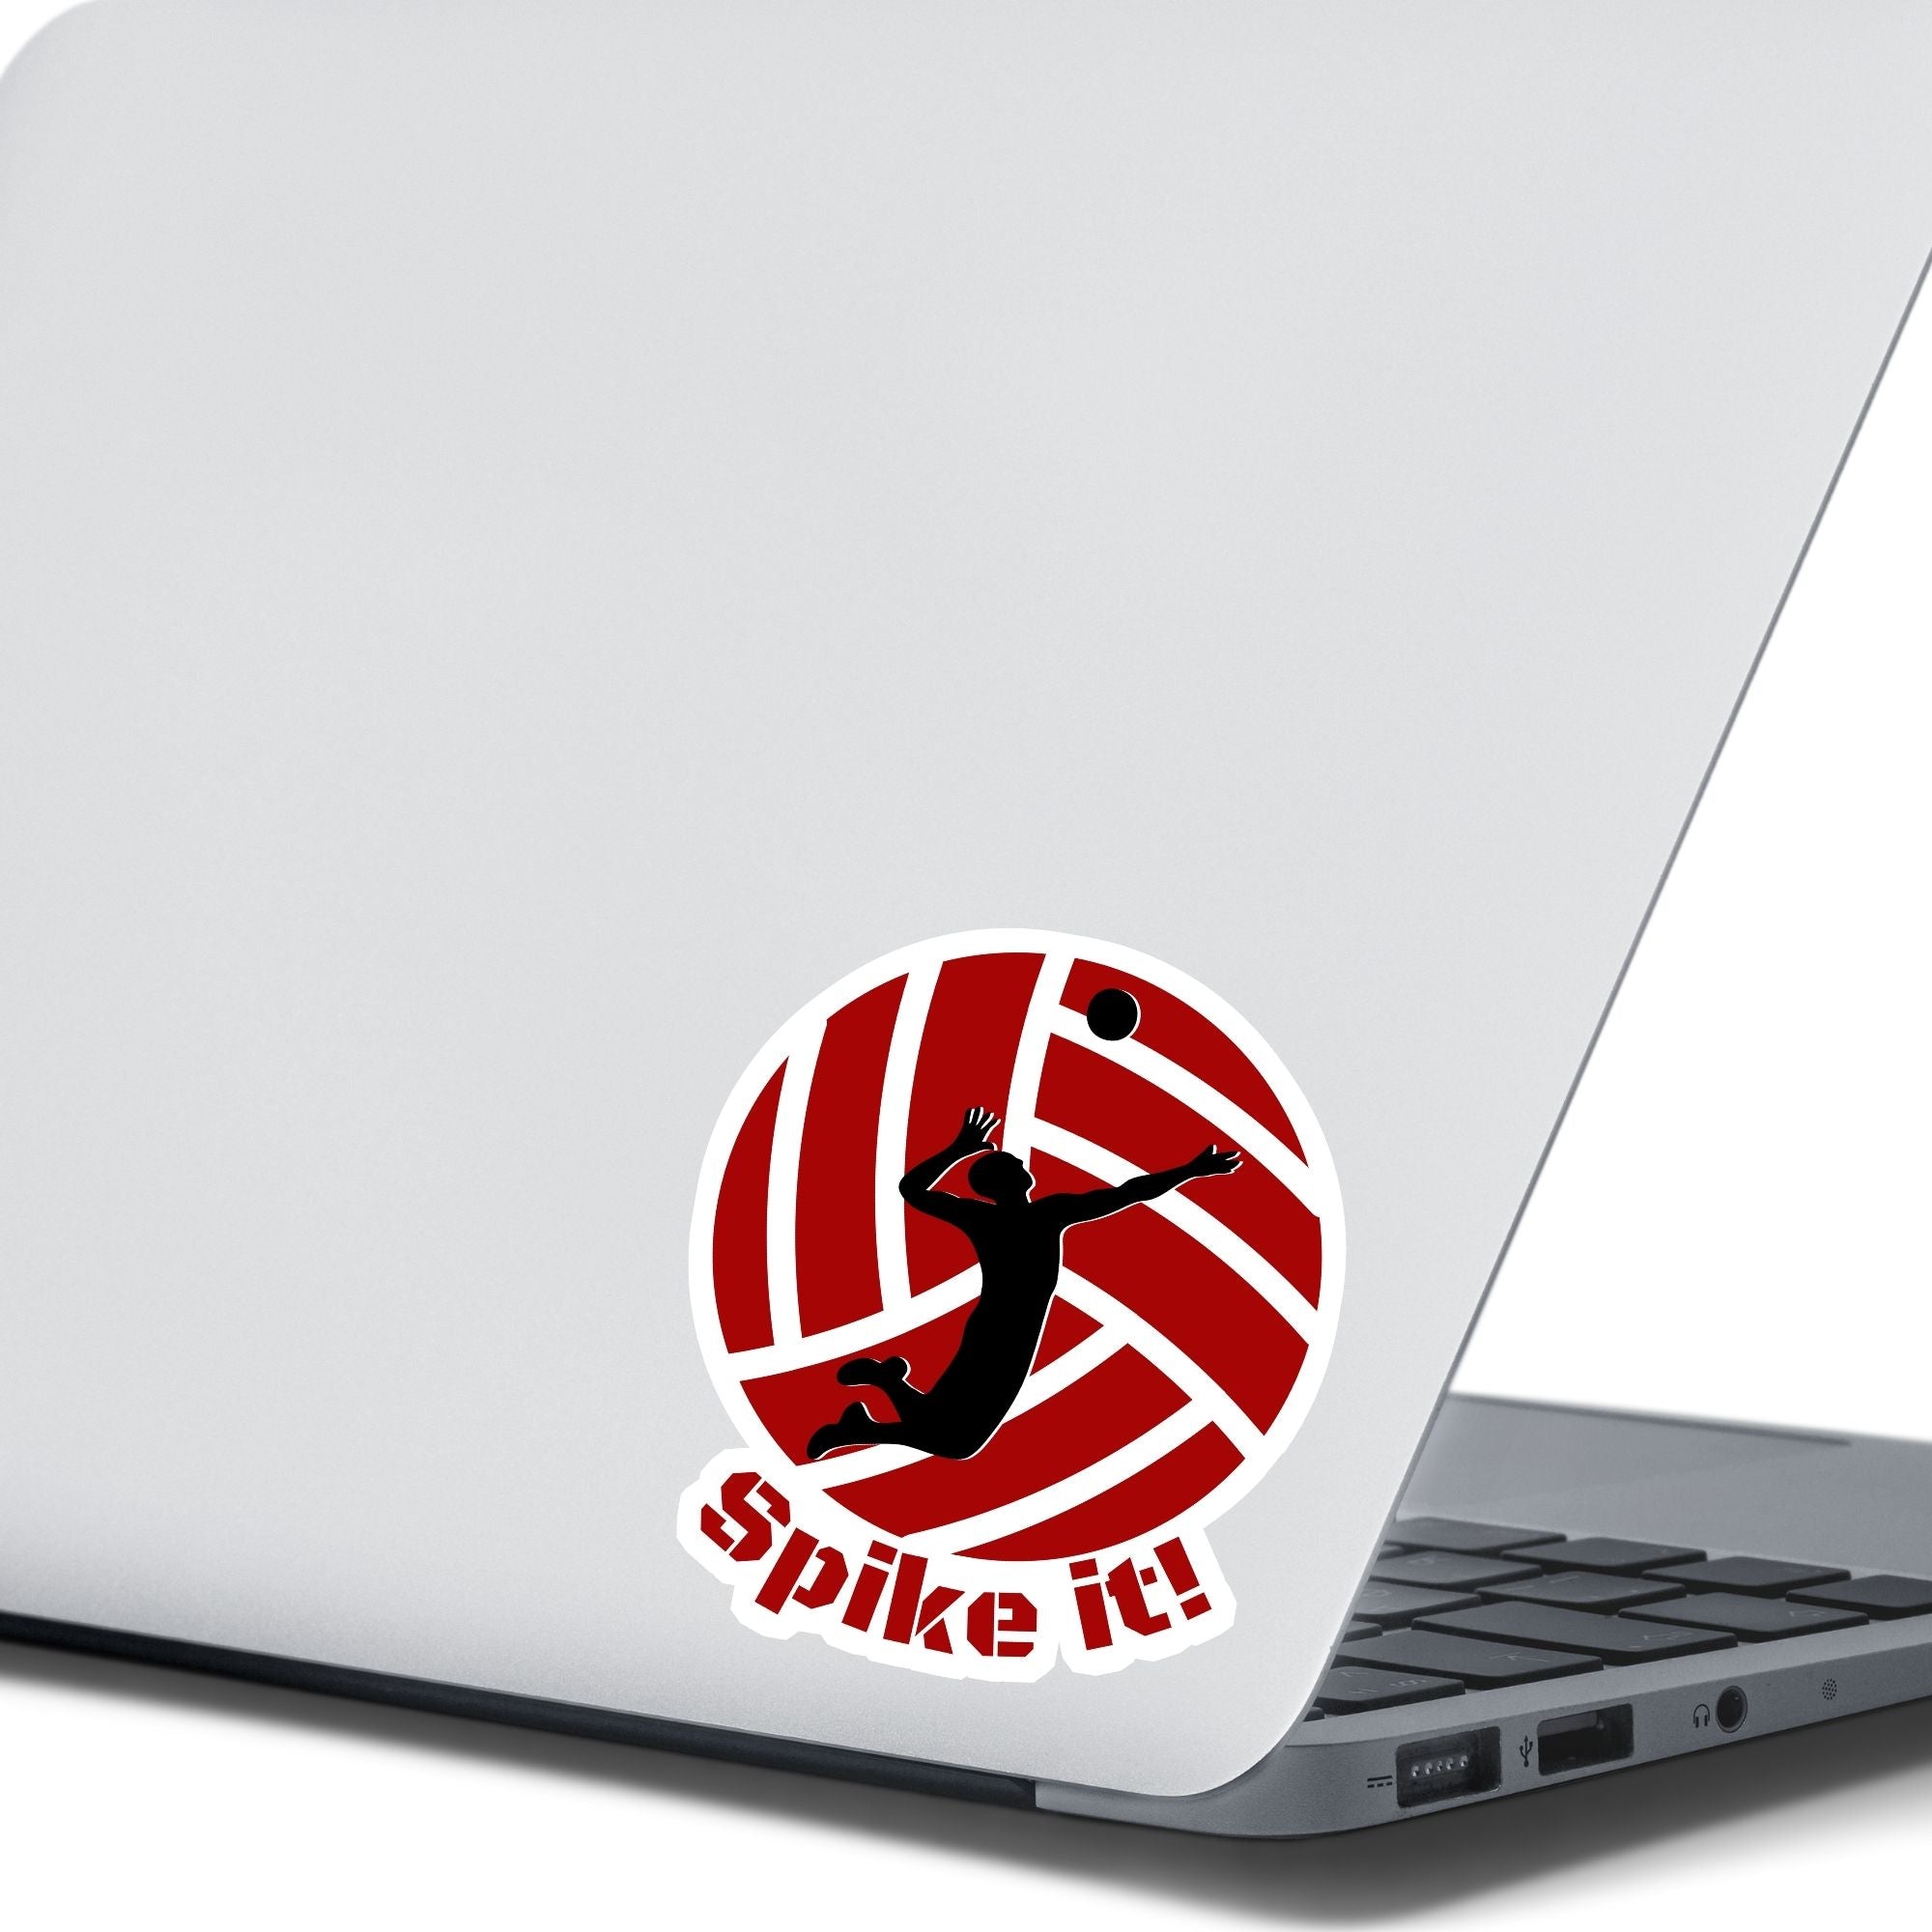 Show your love of volleyball with this individual die-cut sticker! This sticker shows the silhouette of a player about to spike the ball, on a maroon and white volleyball background, with the words "Spike it!" below. This image shows the volleyball sticker on the back of an open laptop.